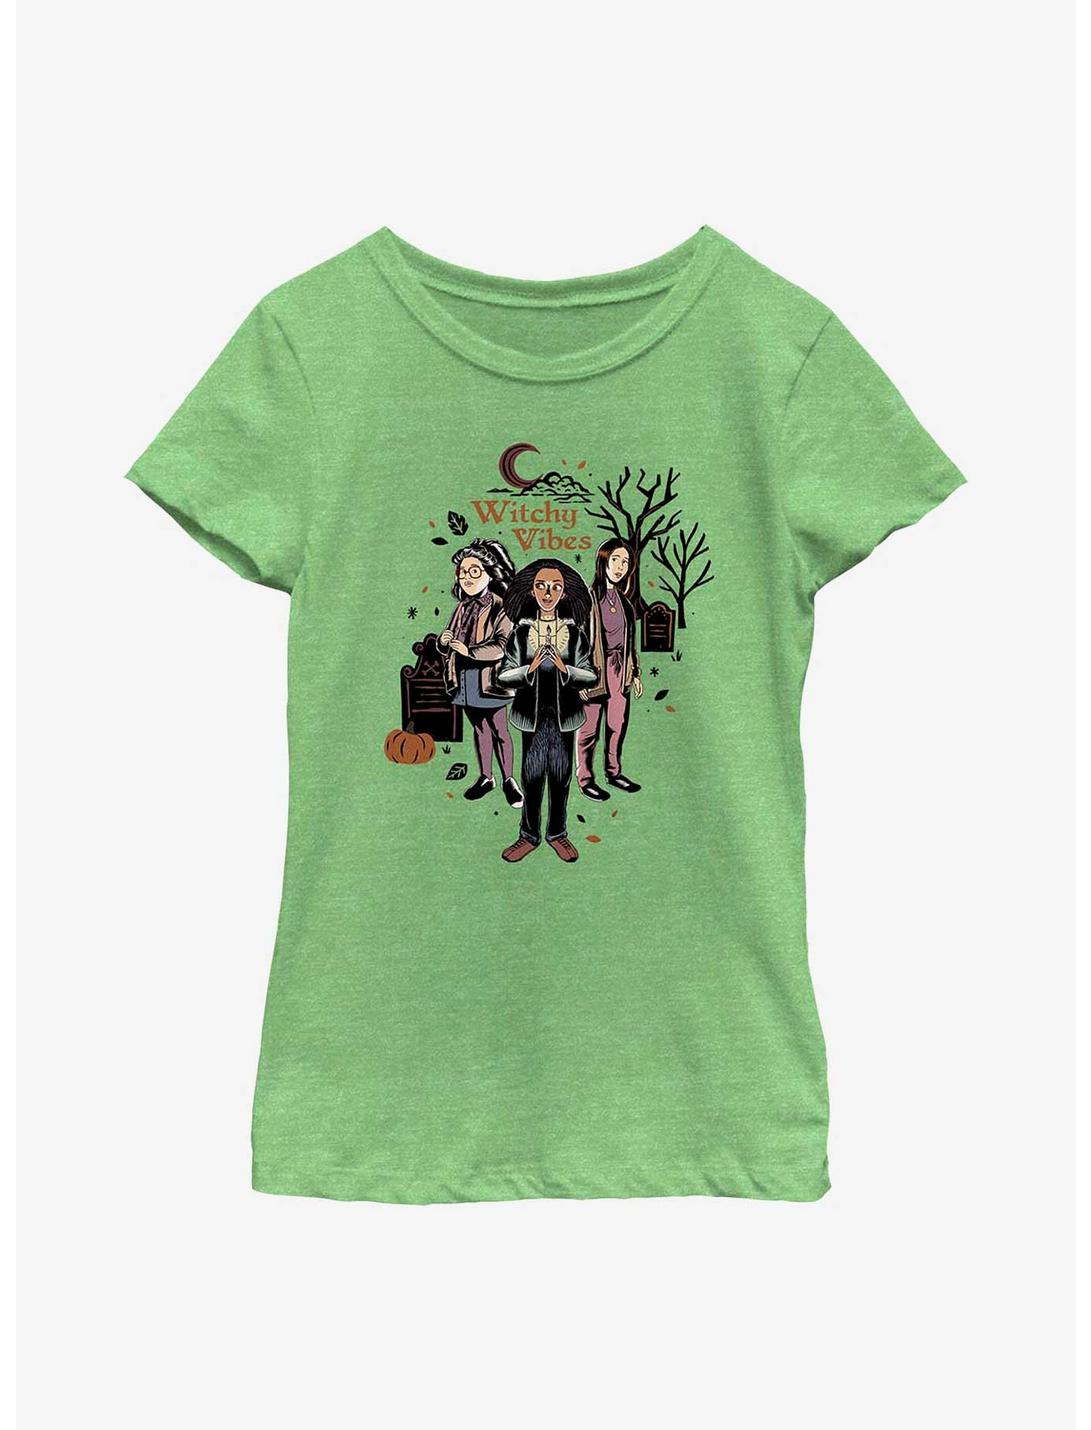 Plus Size Disney Hocus Pocus 2 Witchy Vibes Youth Girls T-Shirt, GRN APPLE, hi-res